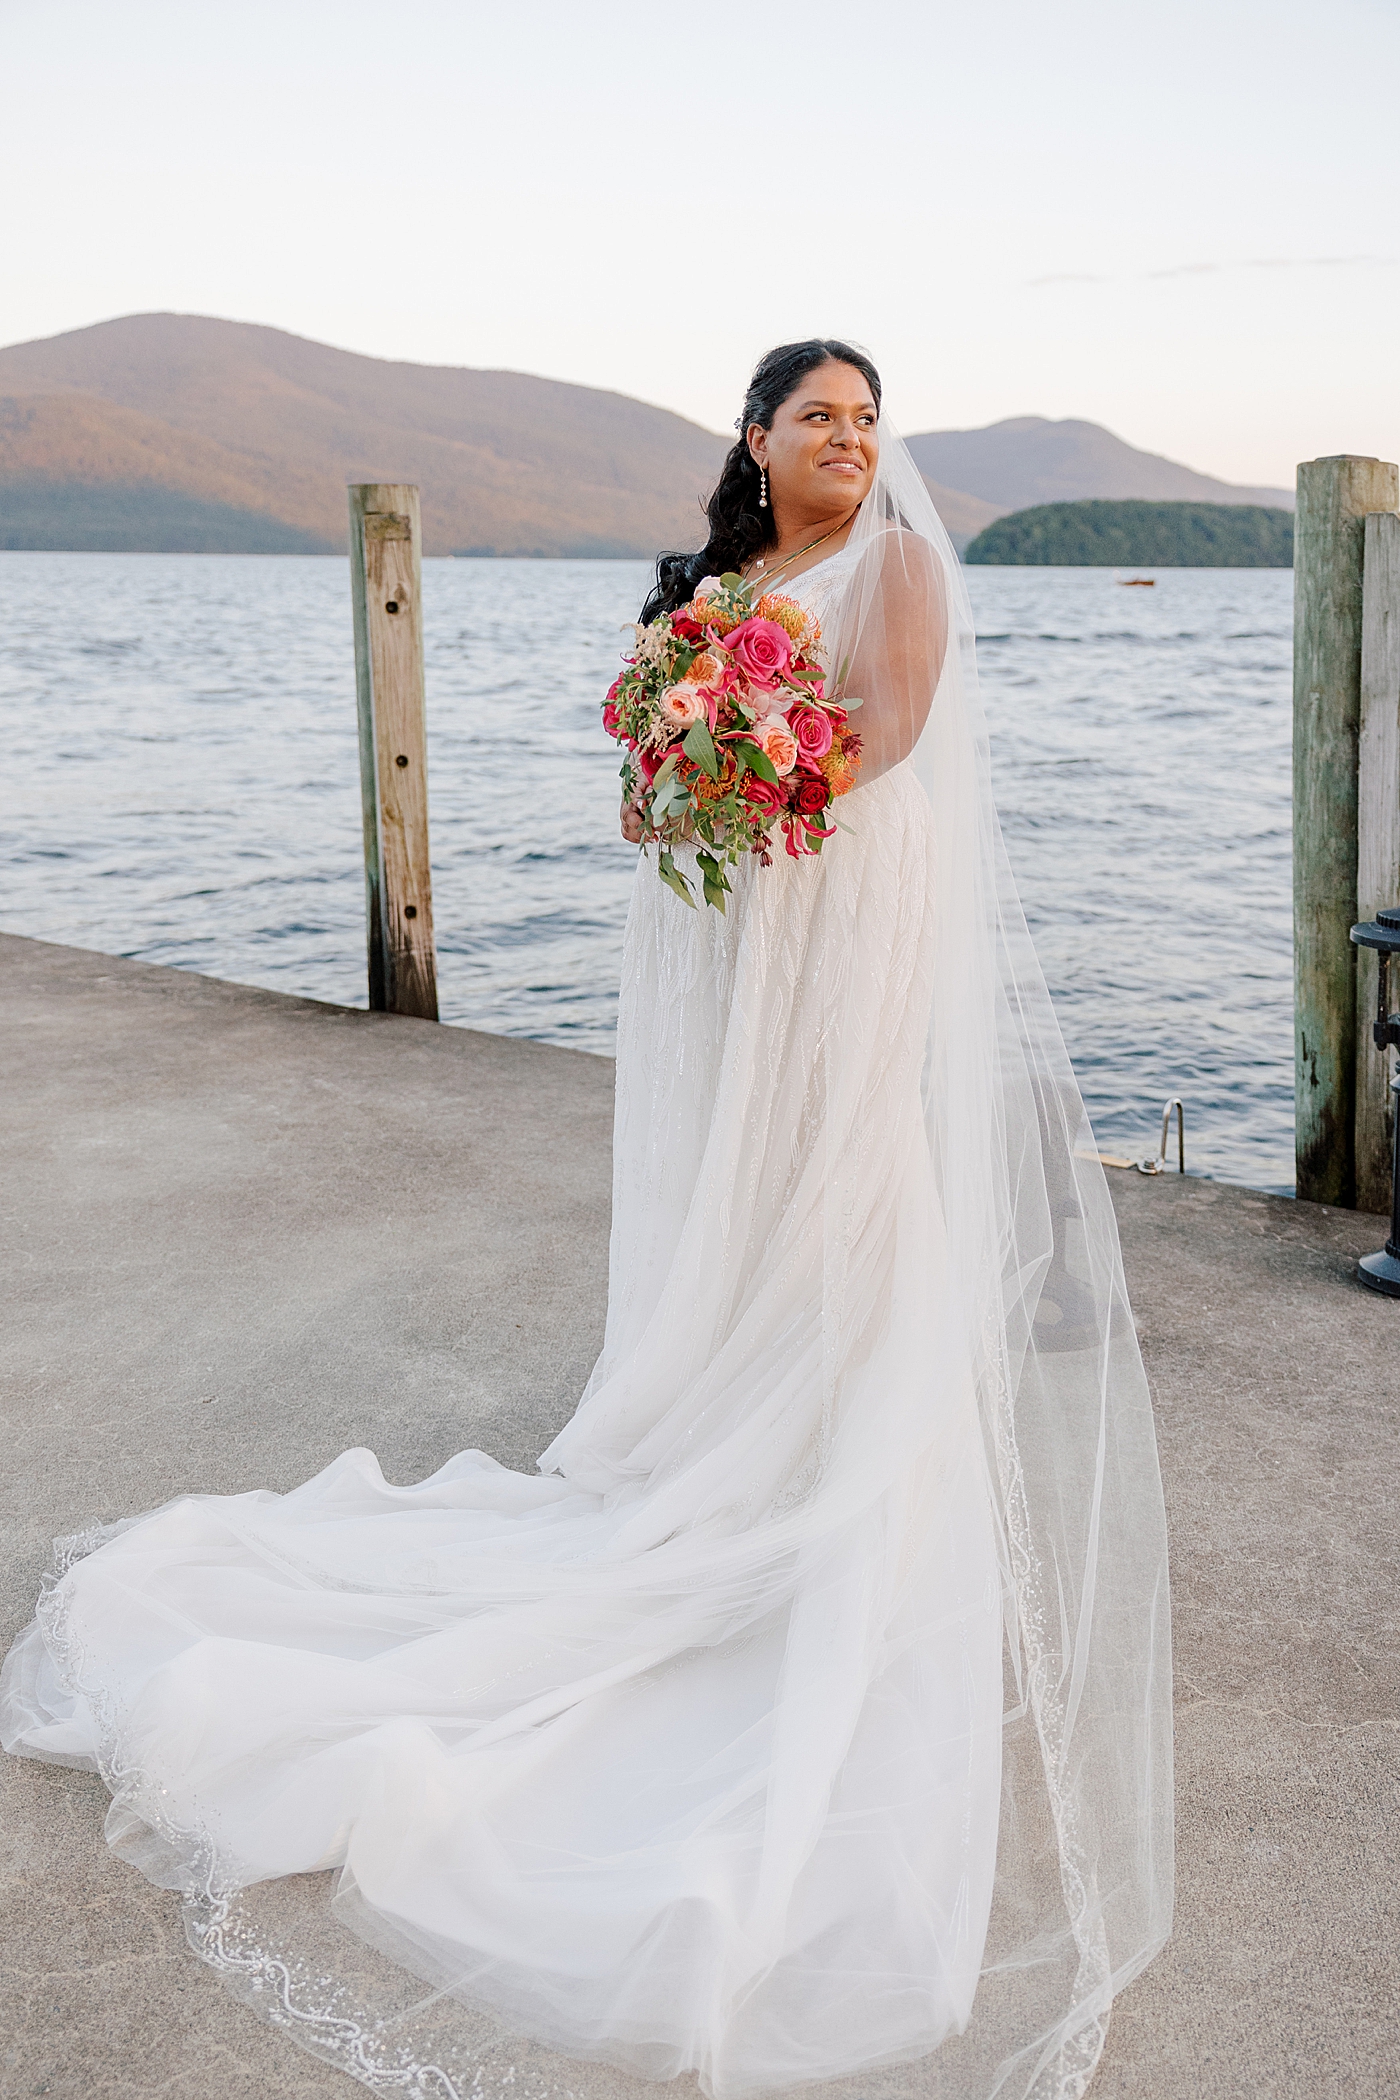 Bride posing, smiling on a dock at sunset during their Sagamore Wedding | Image by Hope Helmuth Photography